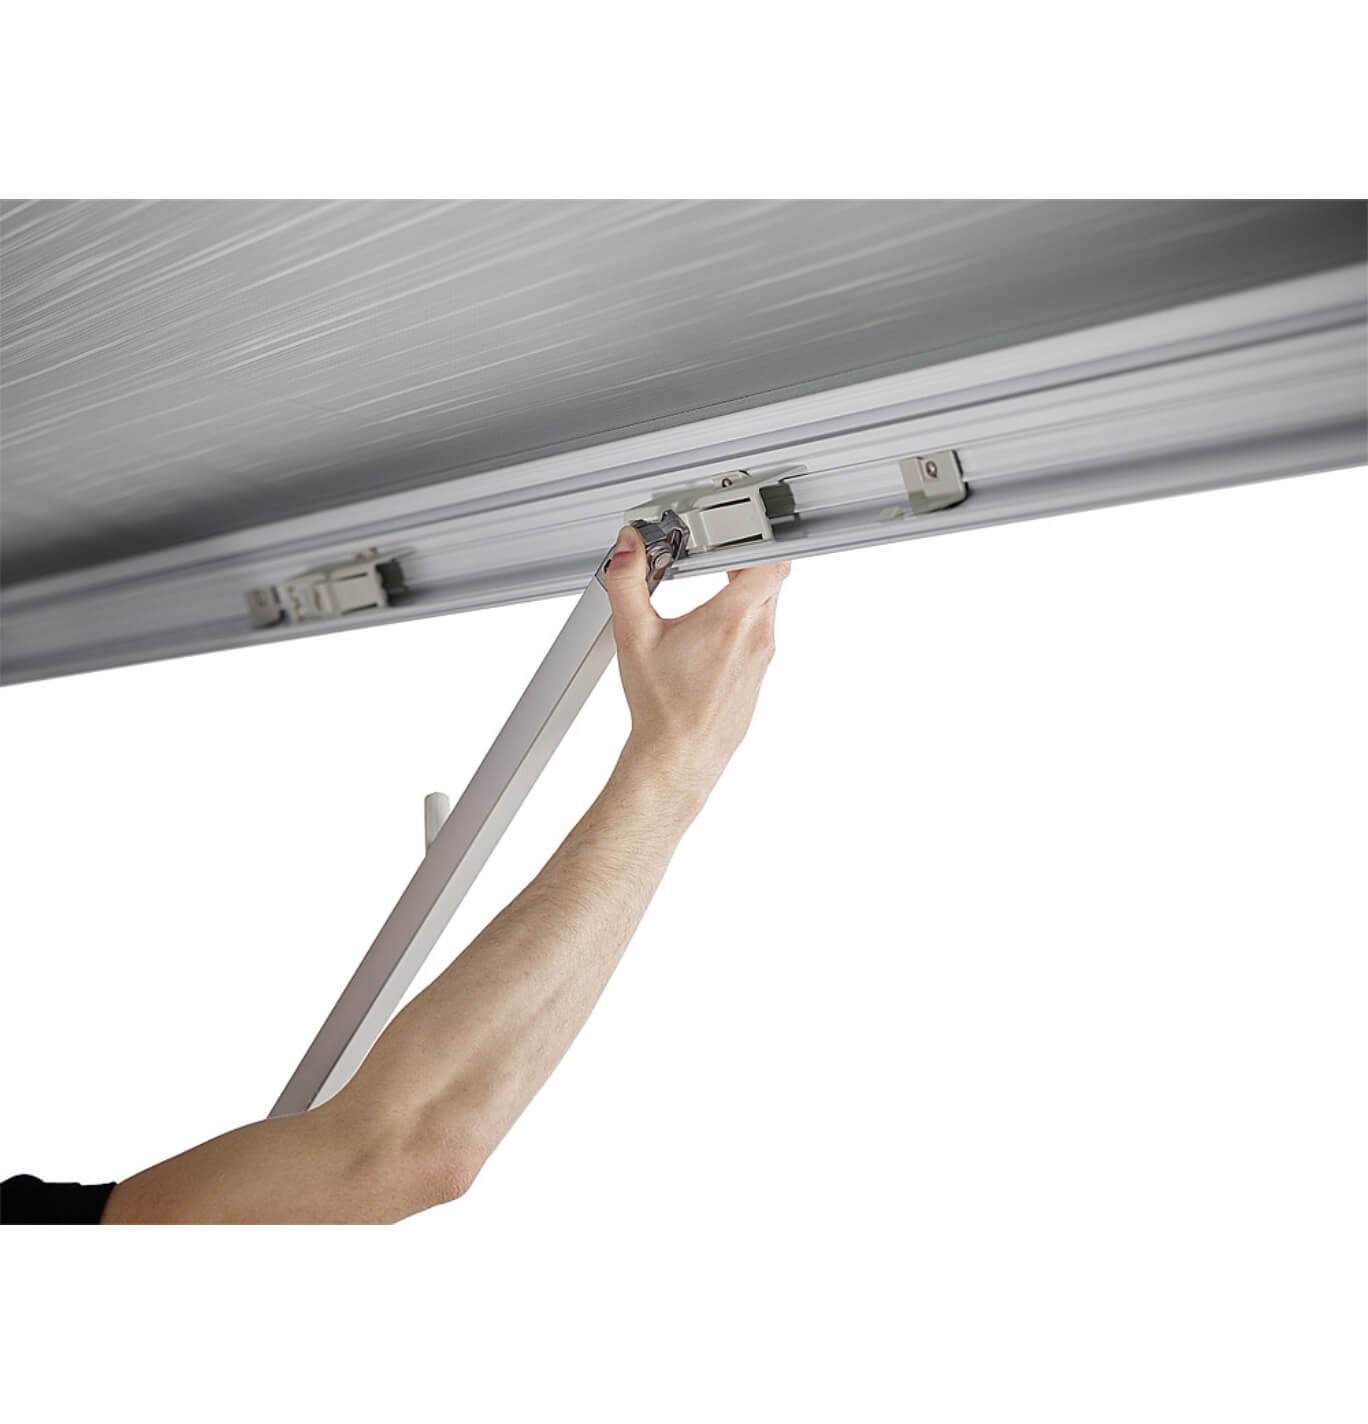 Thule Omnistor 5200 | 4.02m Anodised | White Wall Mounted Awning | 301153 Image